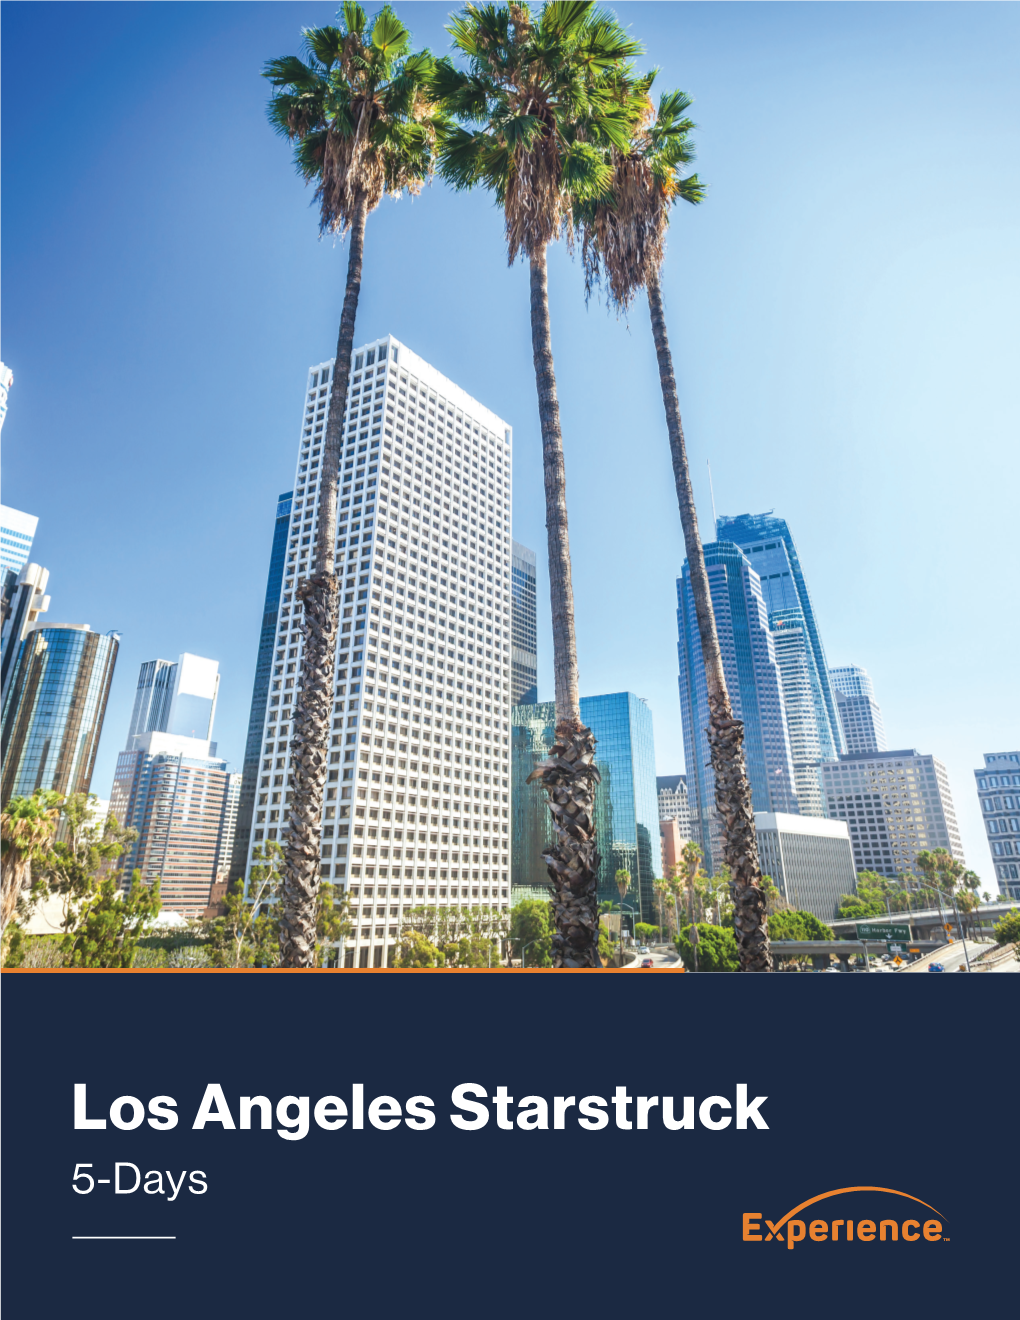 Los Angeles Starstruck 5-Days the Perfect Balance of Learning, Fun and Culture